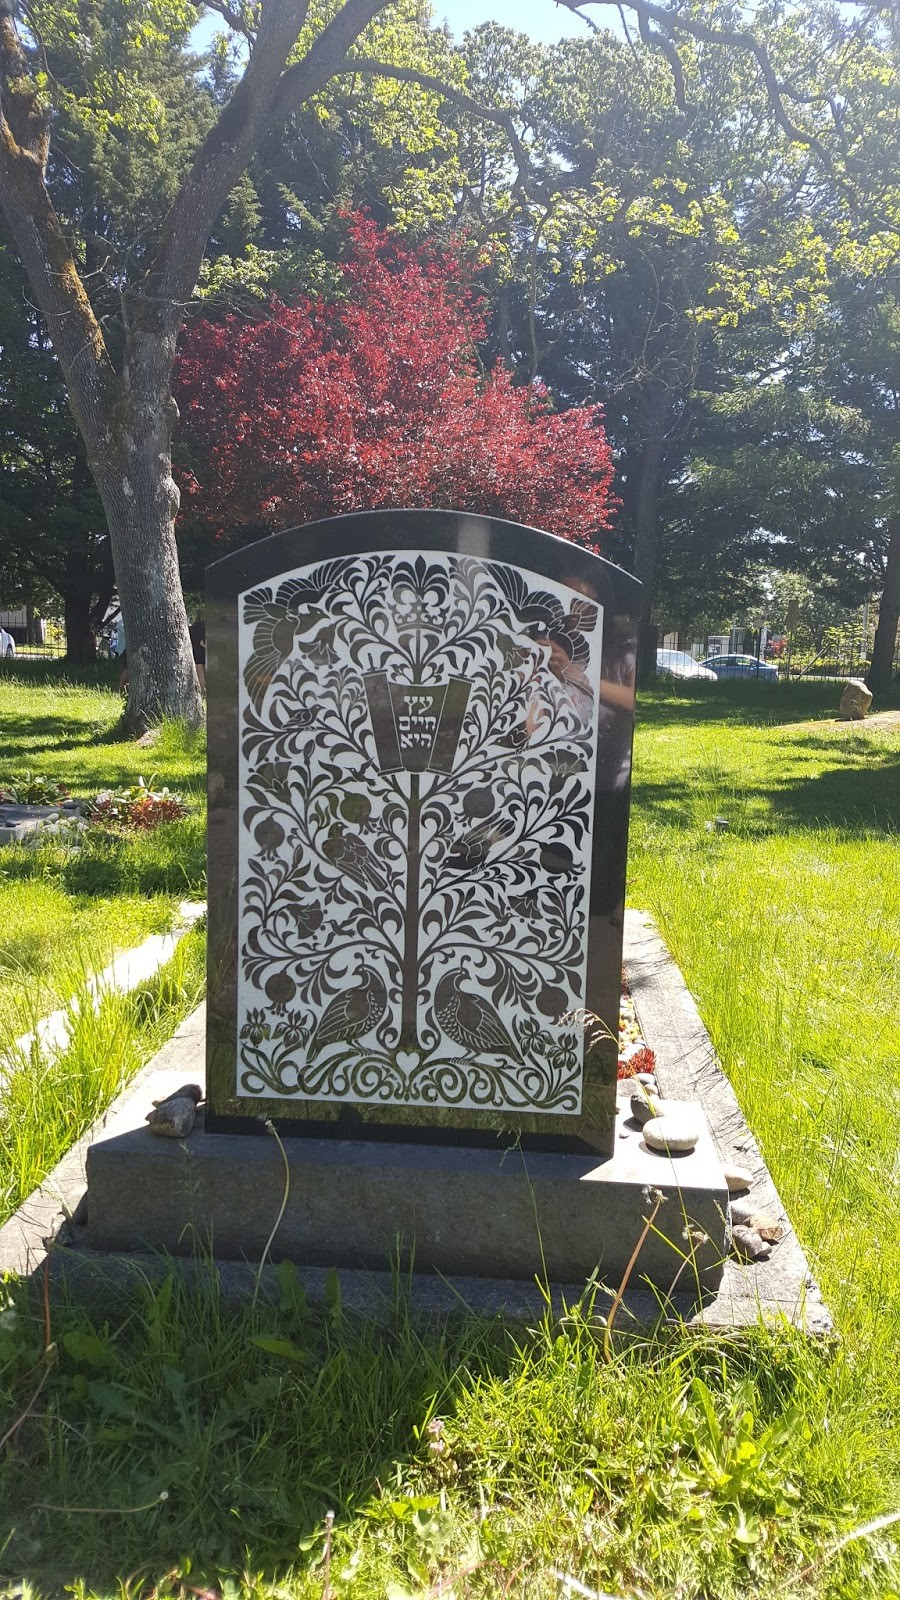 Gravestone Preservation By Torah L and Katie M | ANTH367: Heritage and